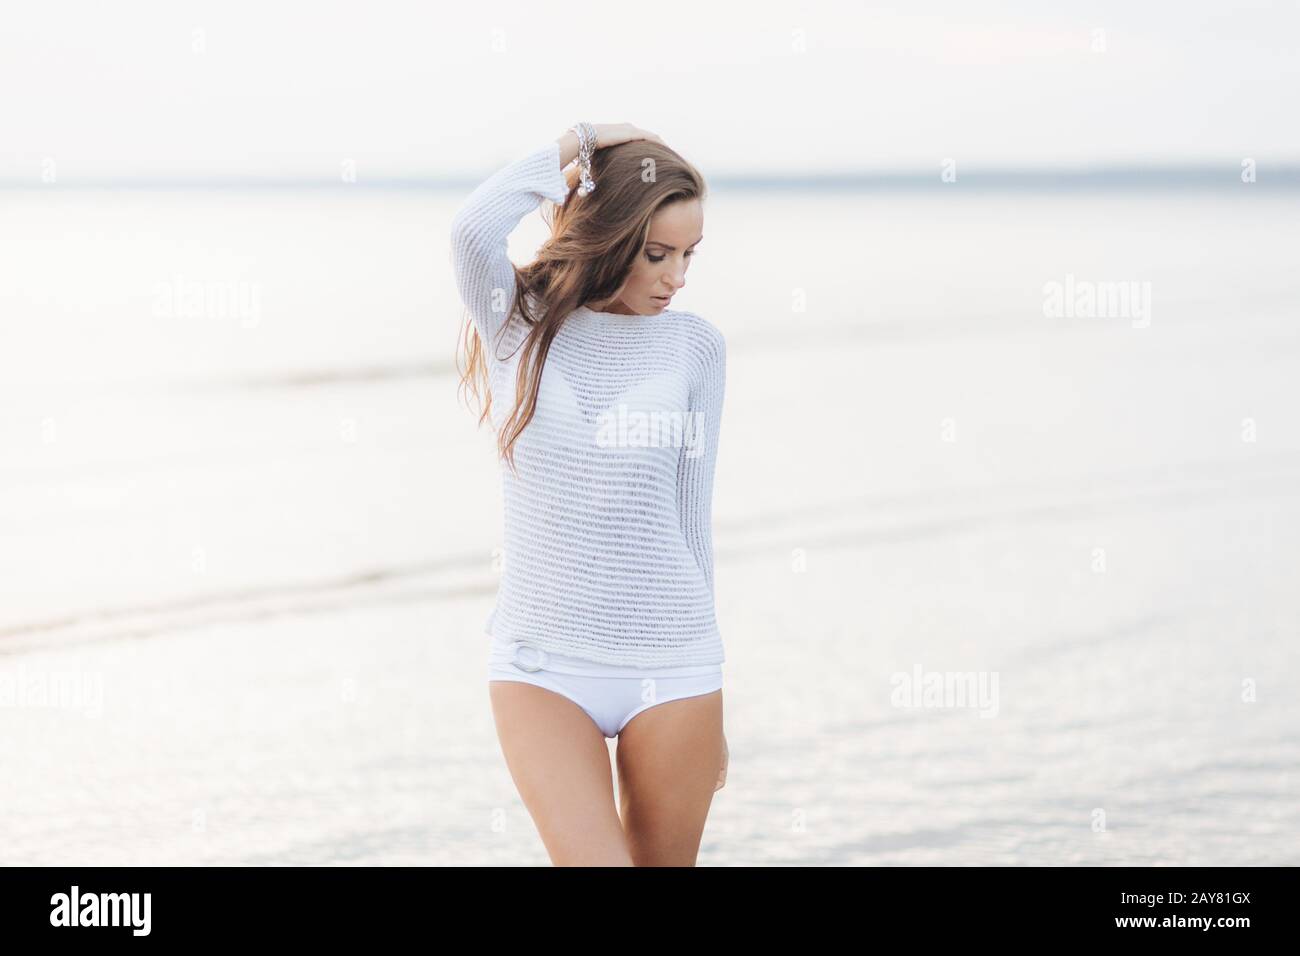 Adorable young female model in white sweater and bikini, stands against beautiful seascape, looks thoughtfully down, dreams about something pleasant a Stock Photo